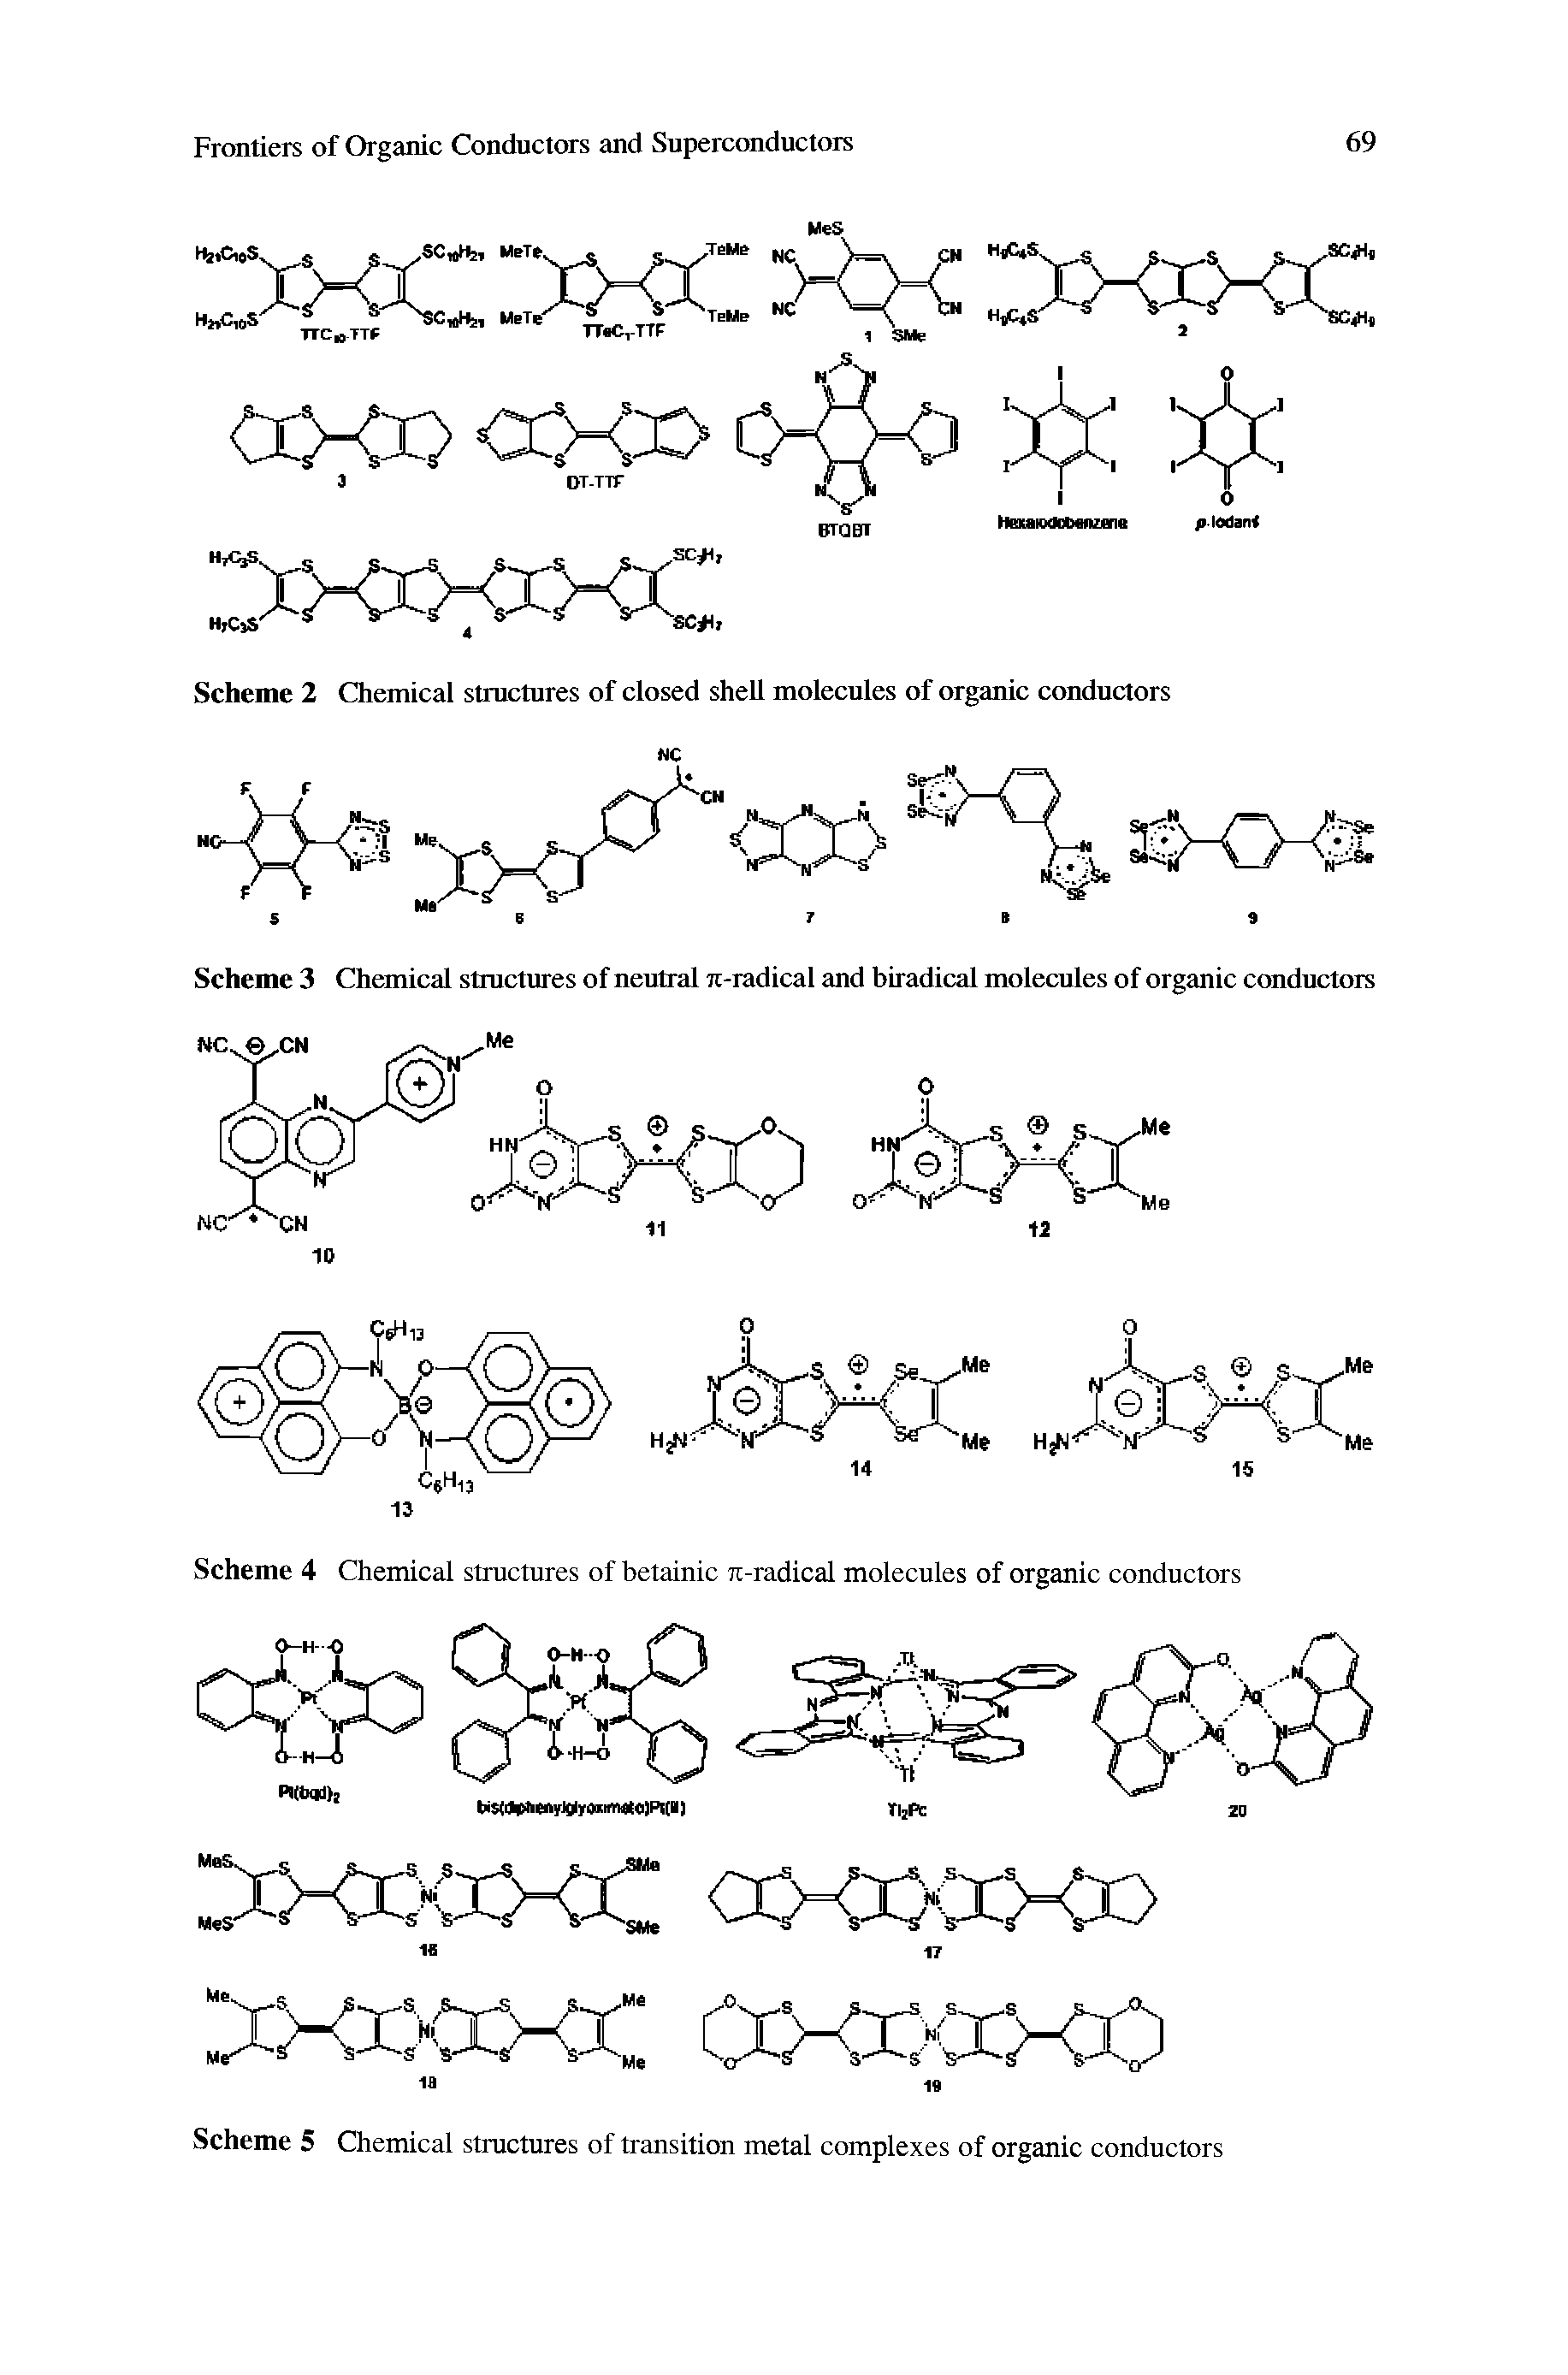 Scheme 2 Chemical structures of closed shell molecules of organic conductors...